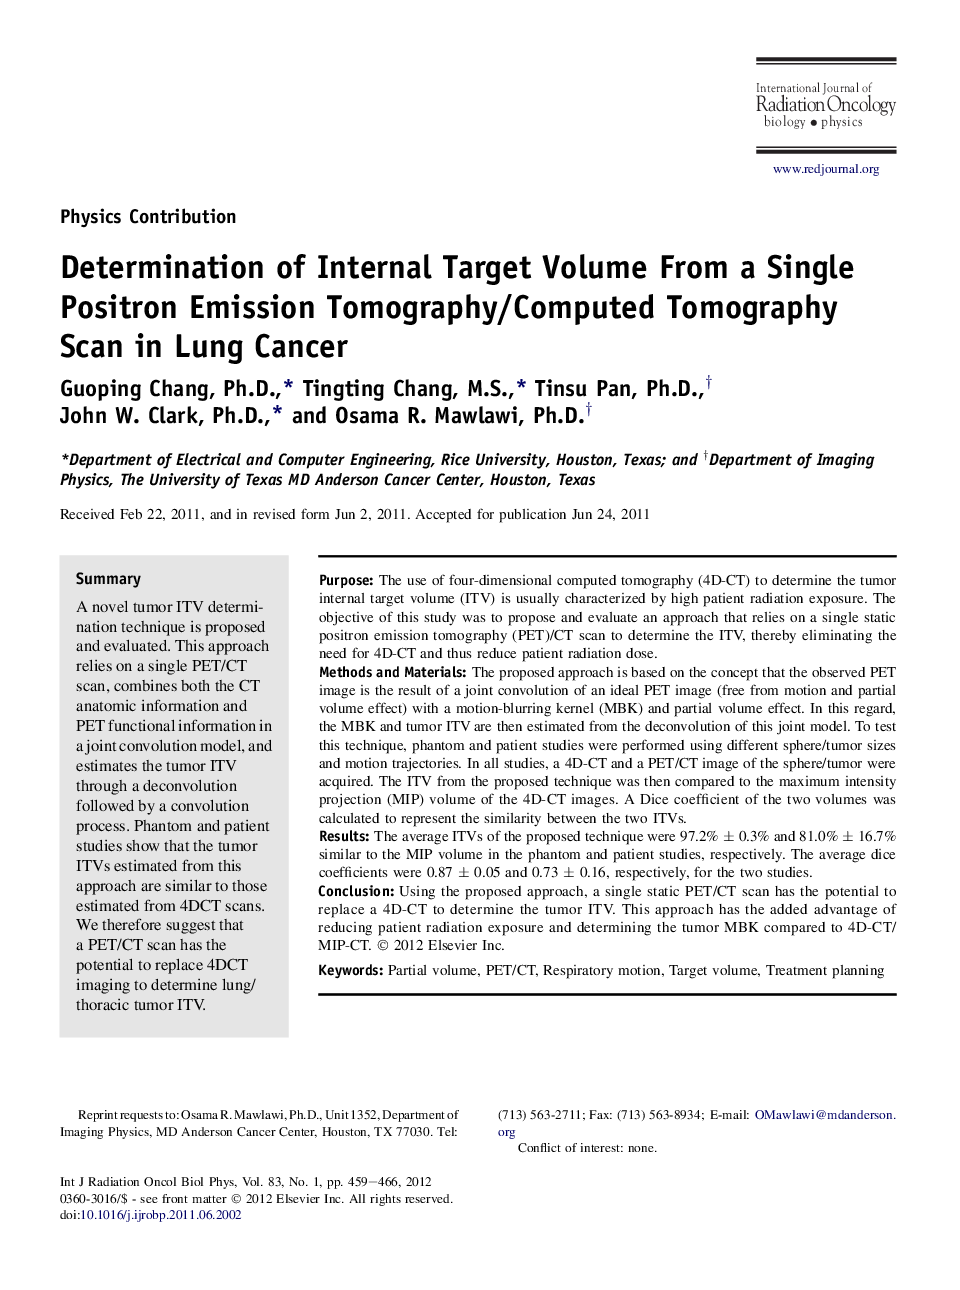 Determination of Internal Target Volume From a Single Positron Emission Tomography/Computed Tomography Scan in Lung Cancer